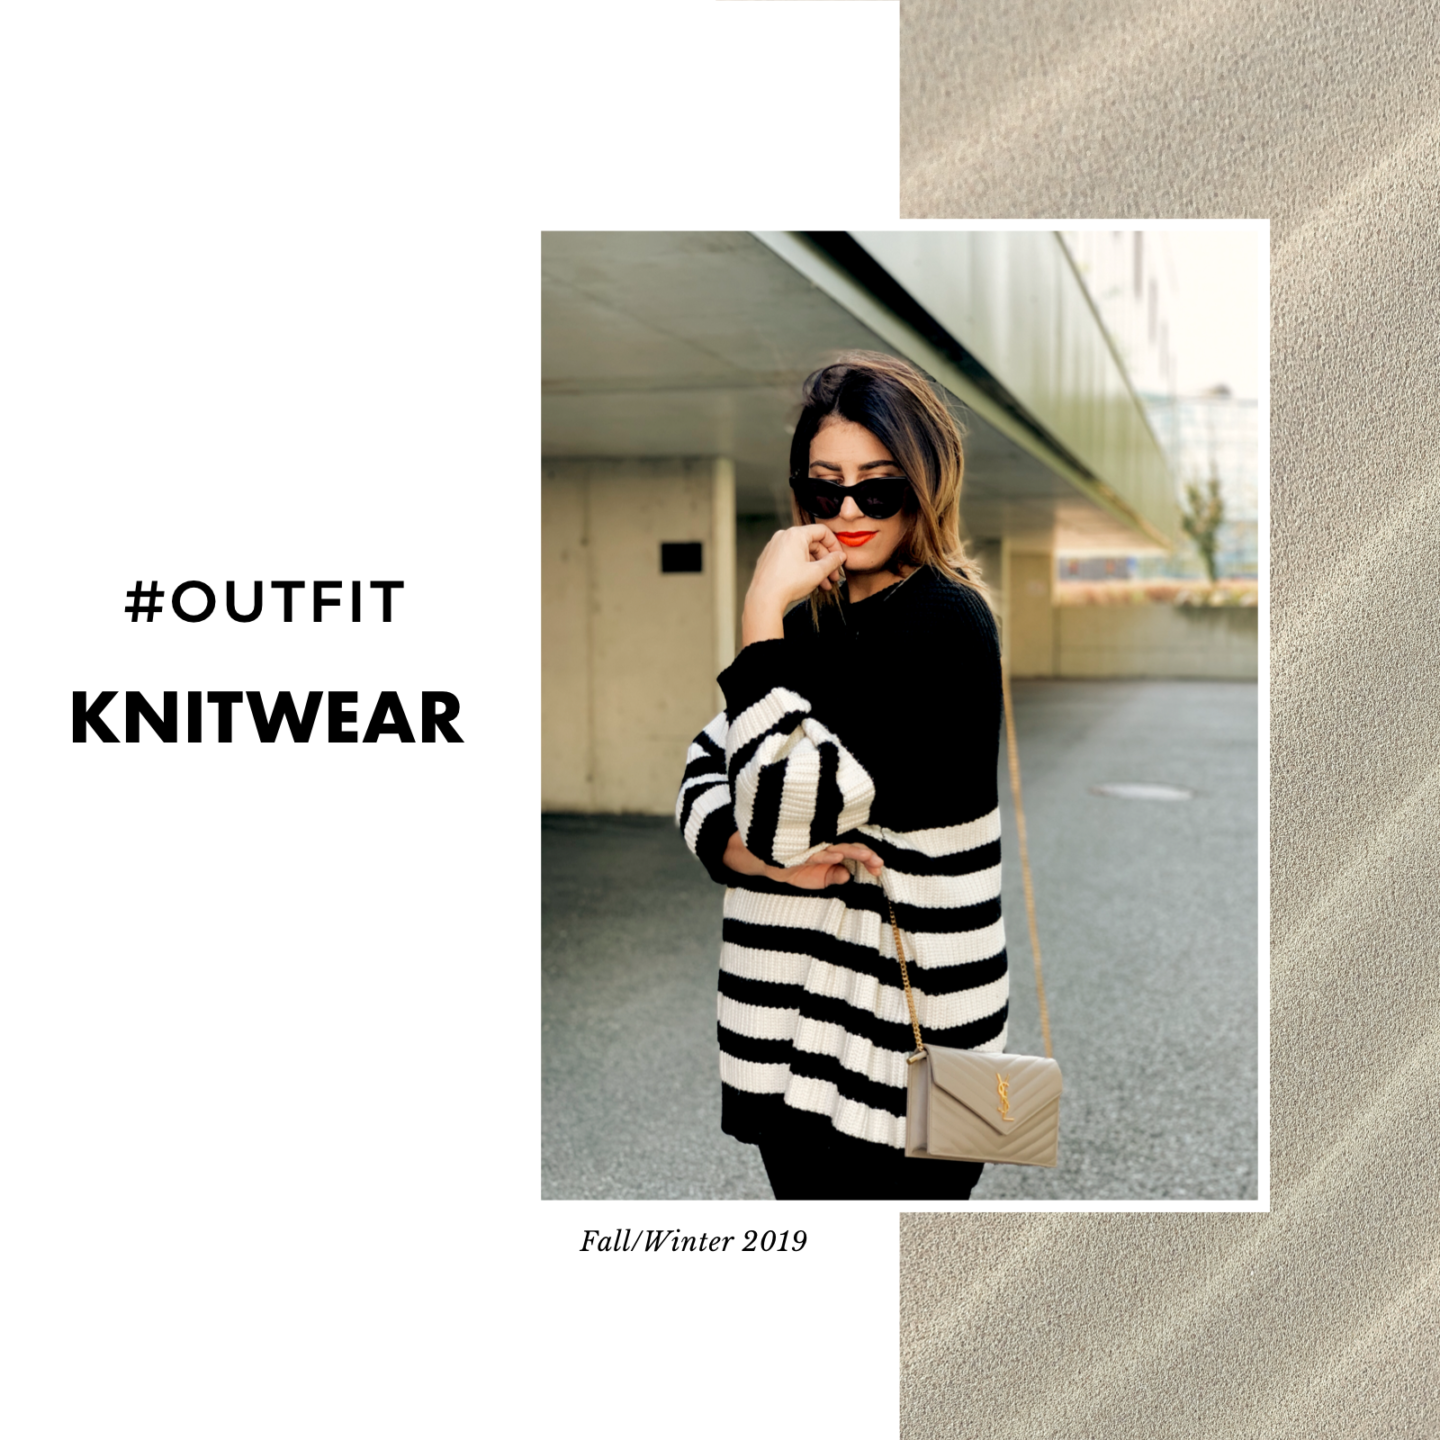 #Outfit: First days of Knitwear